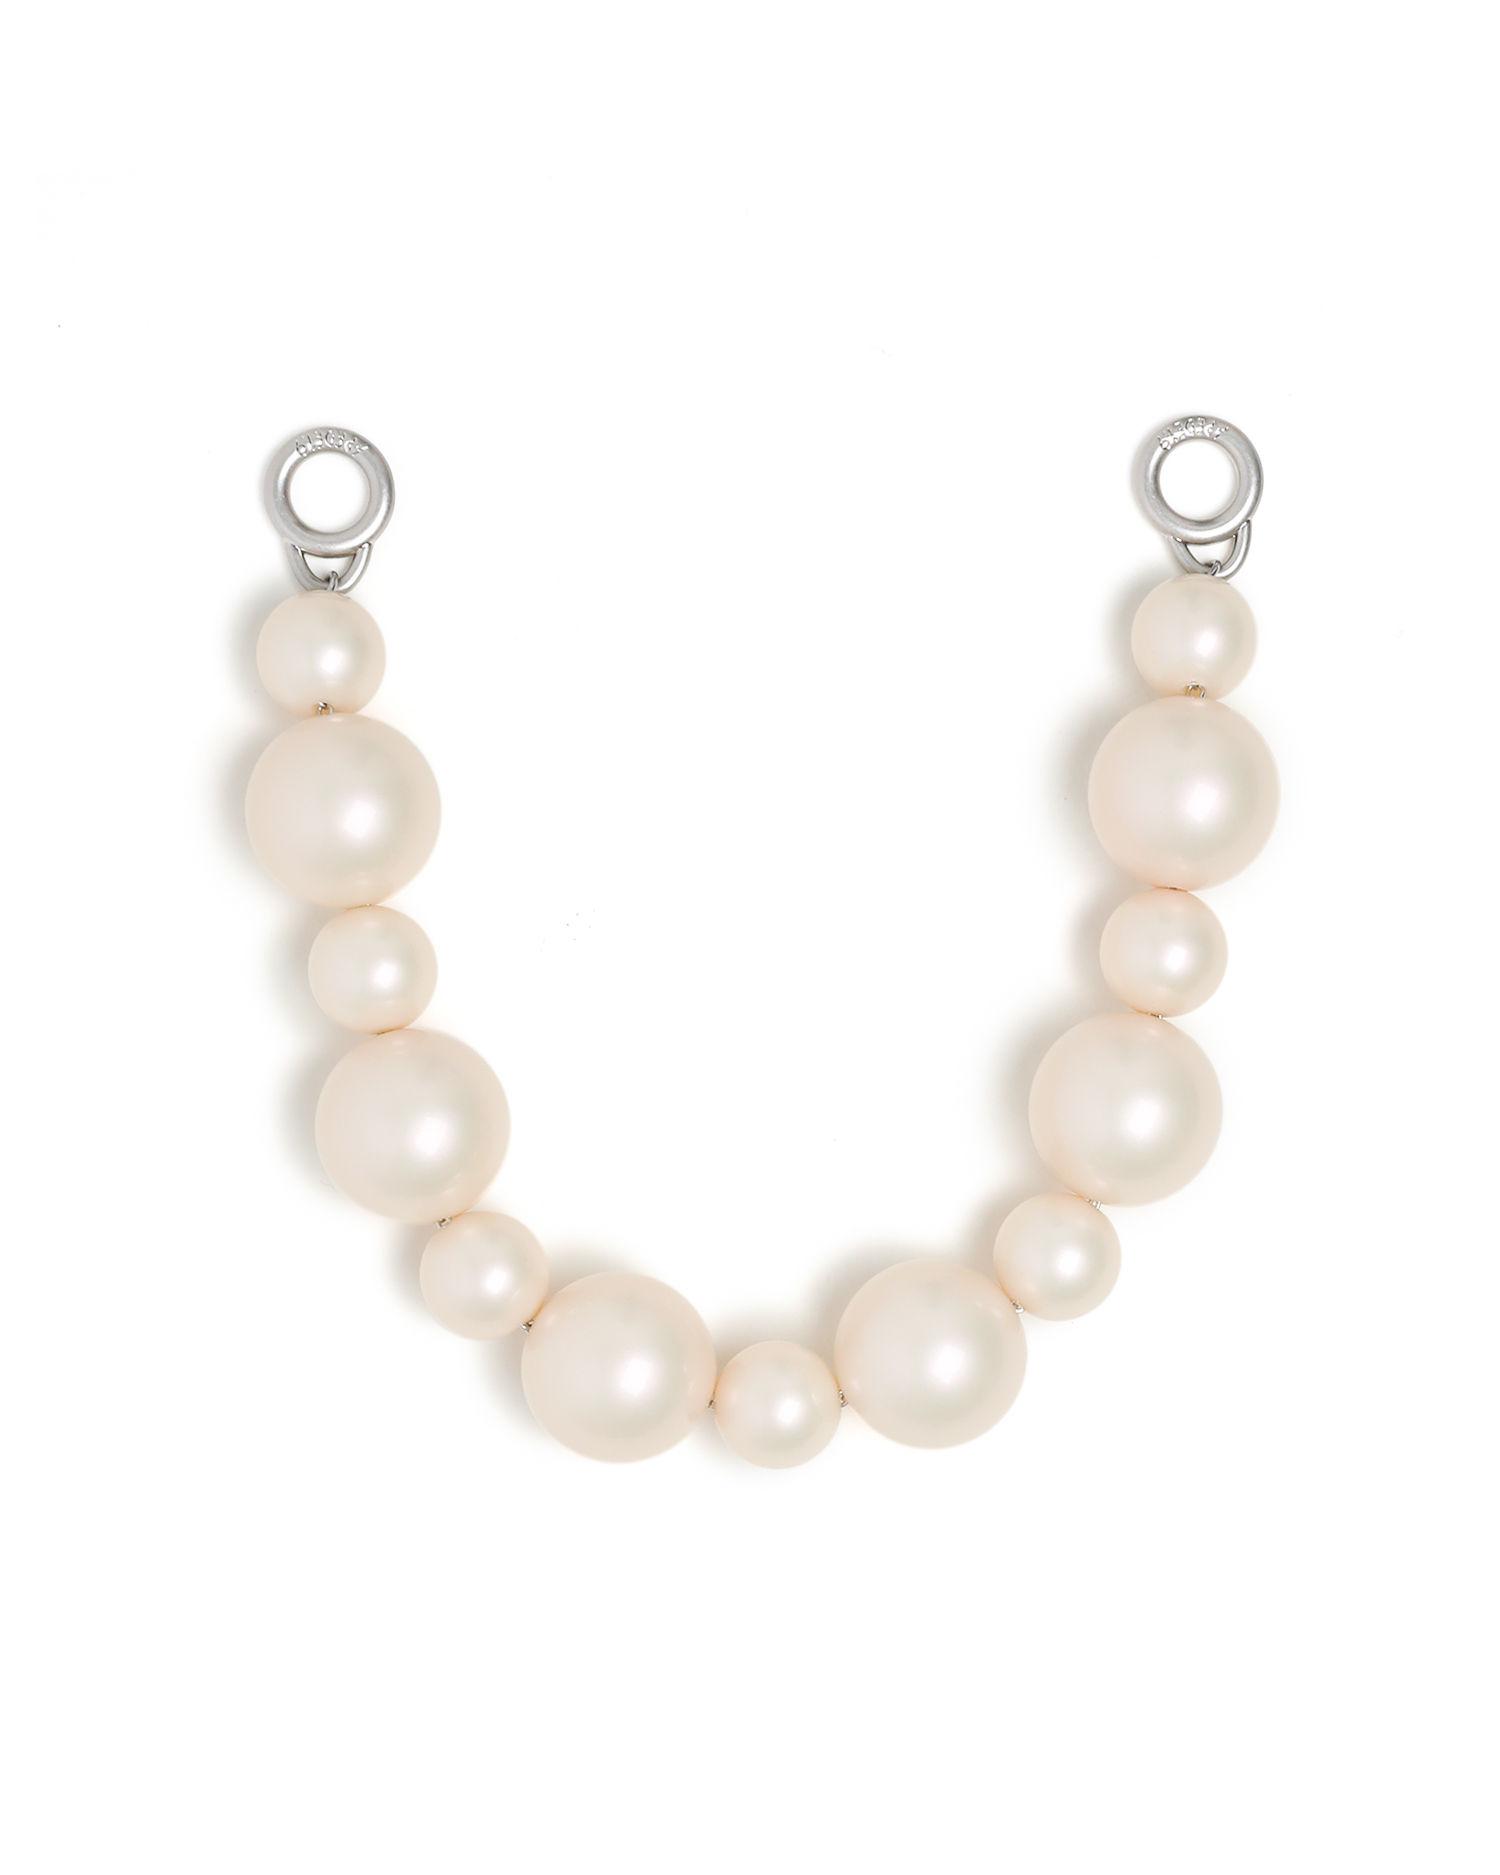 Small faux pearl chain by APEDE MOD